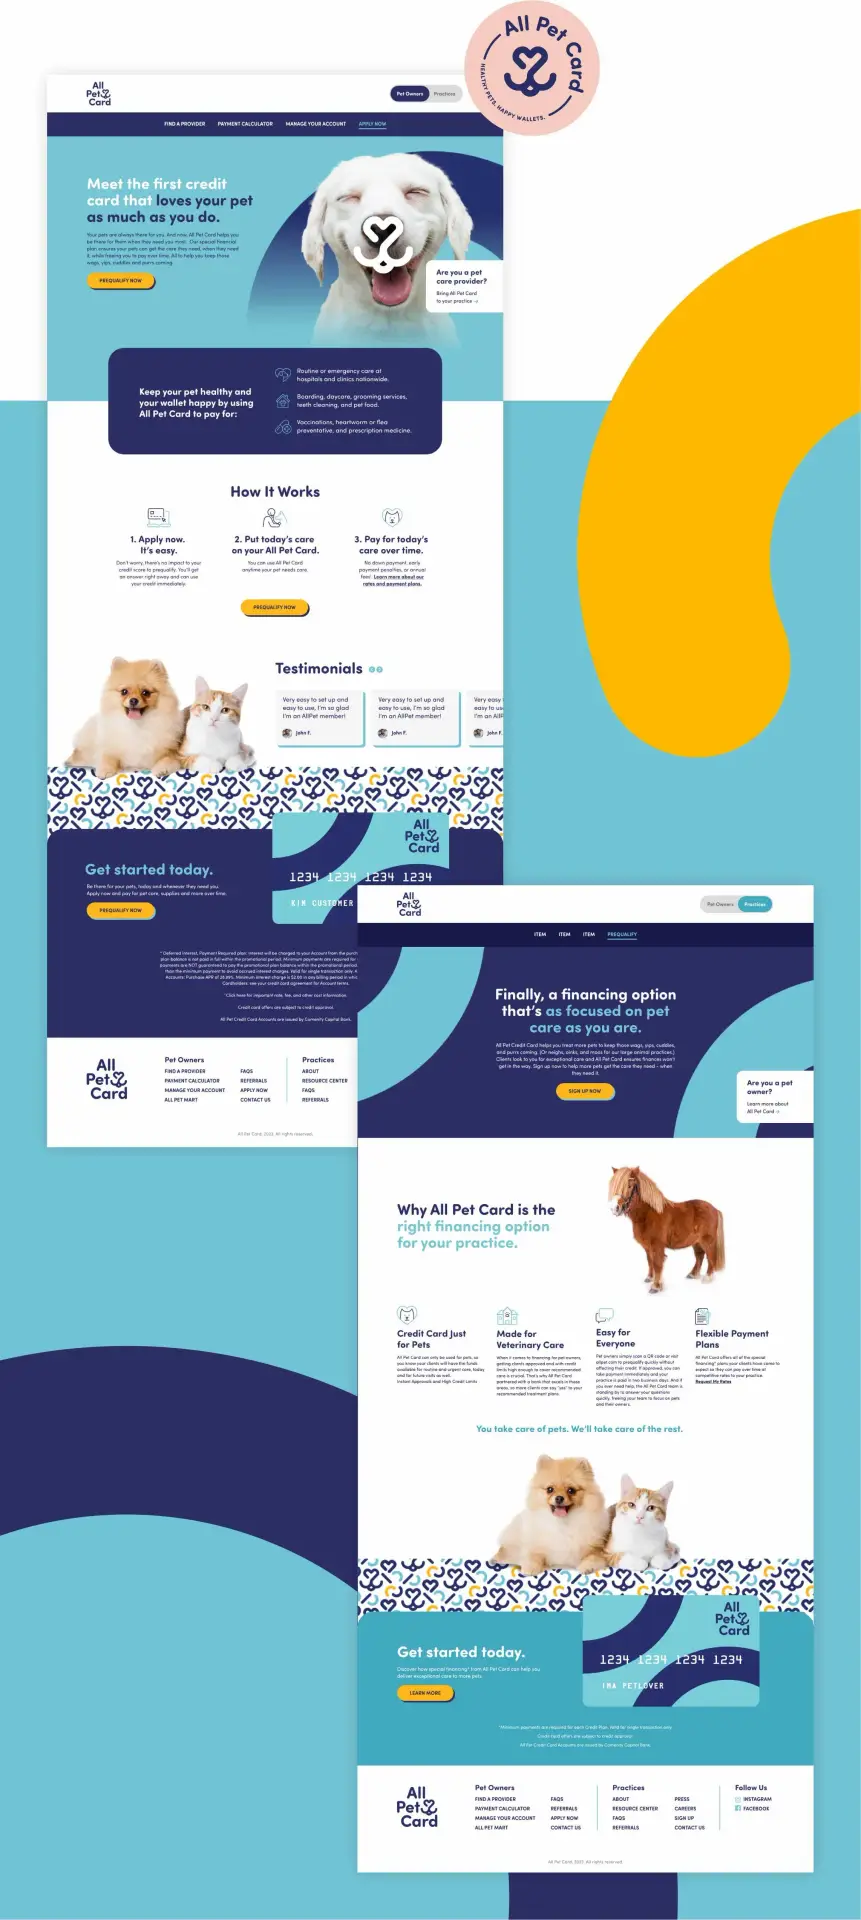 Web site design and branding examples for All Pet Card